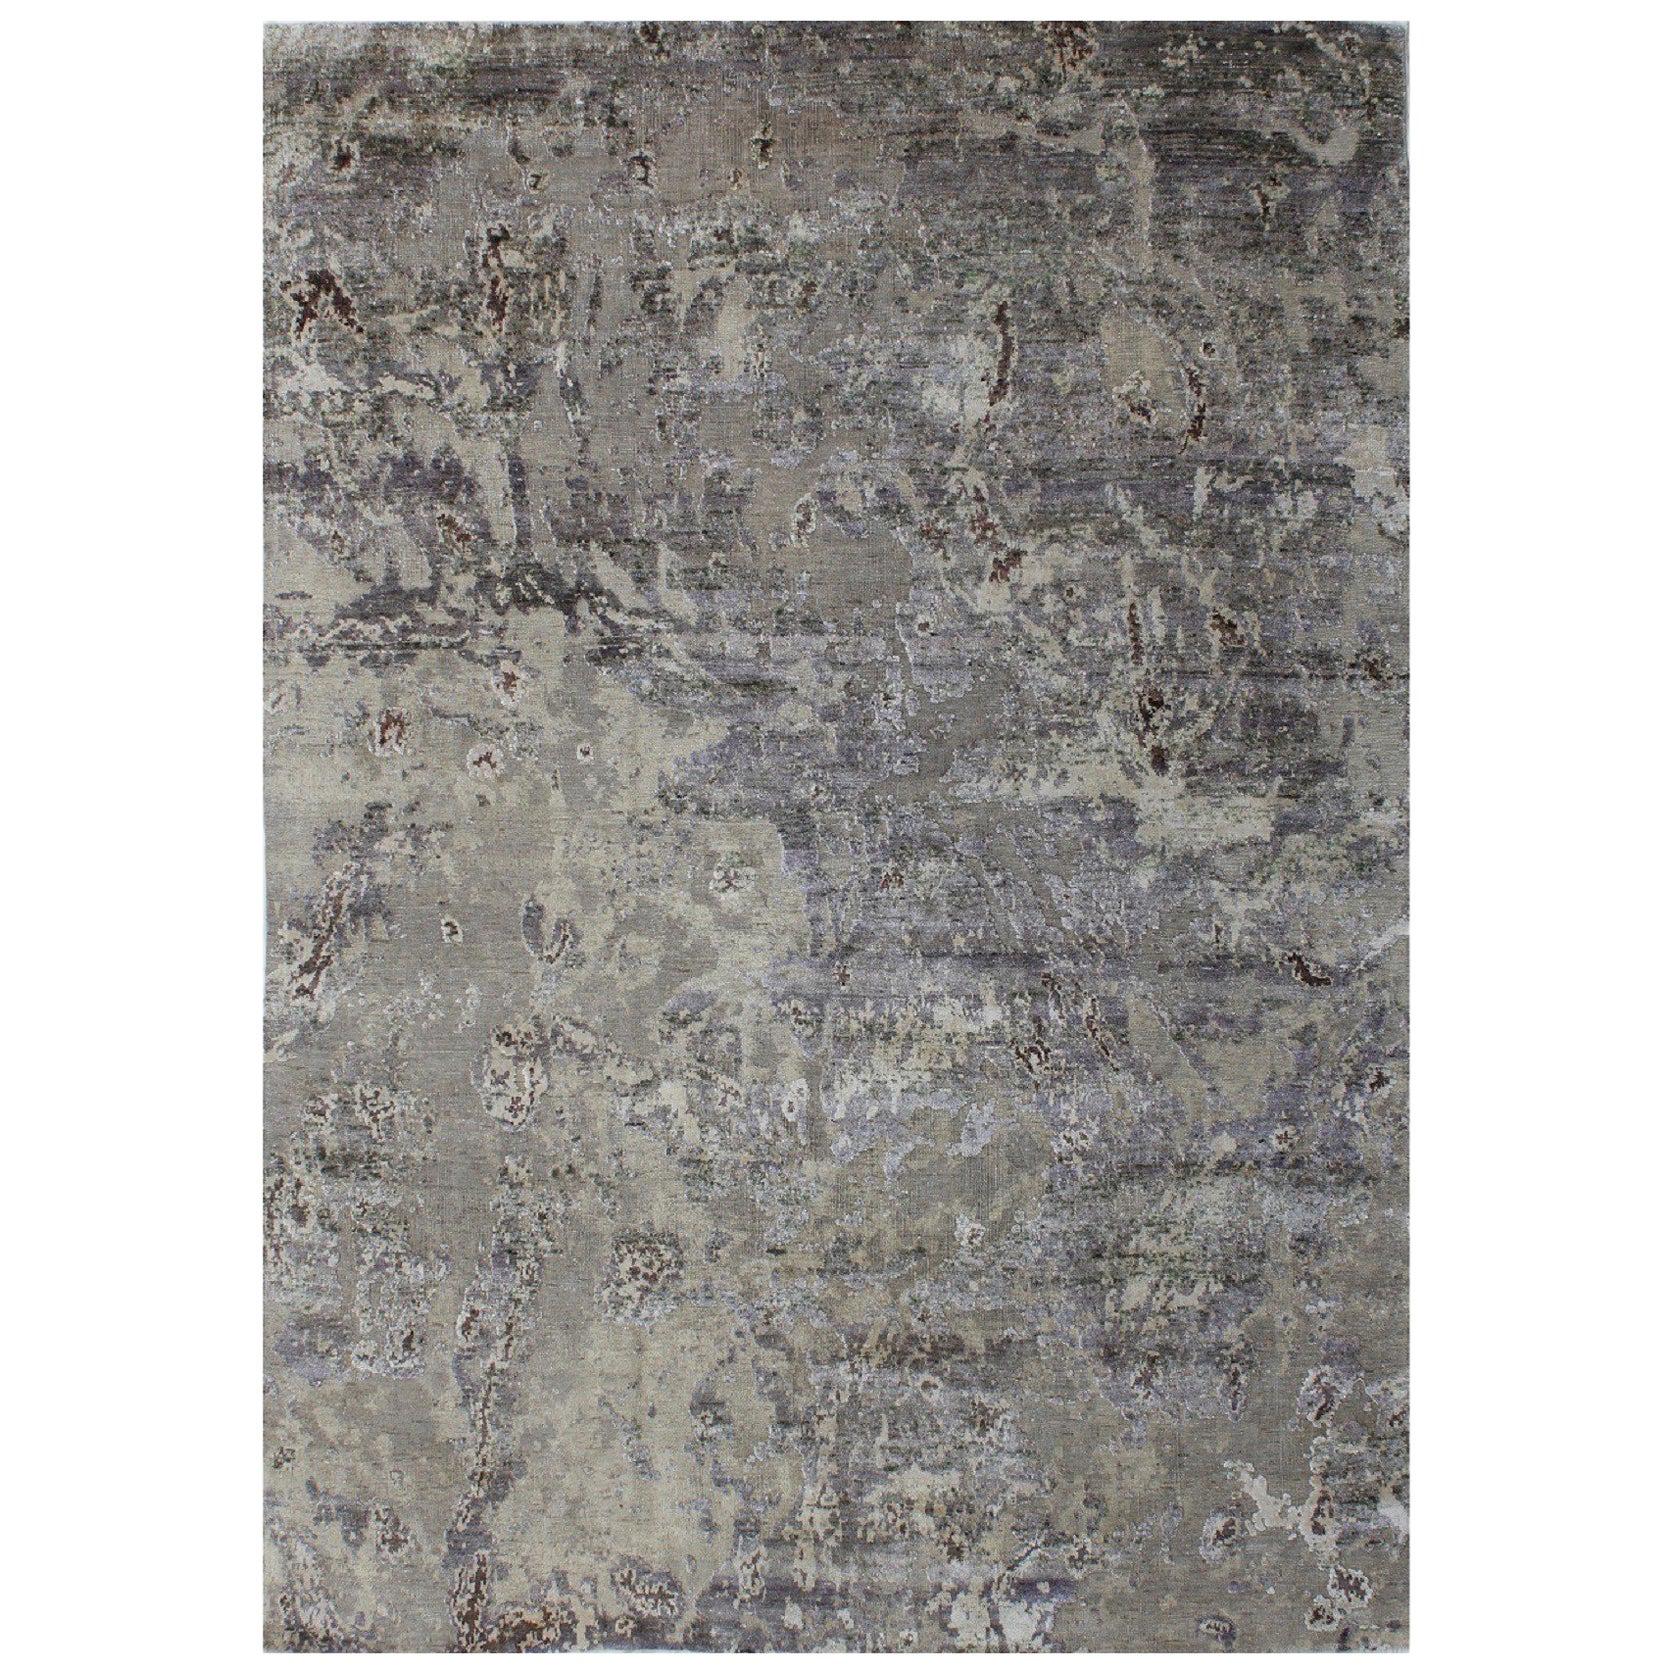 Abstract Organic Hand Knotted Wool and Silk Custom Grey Silver and Beige Rug